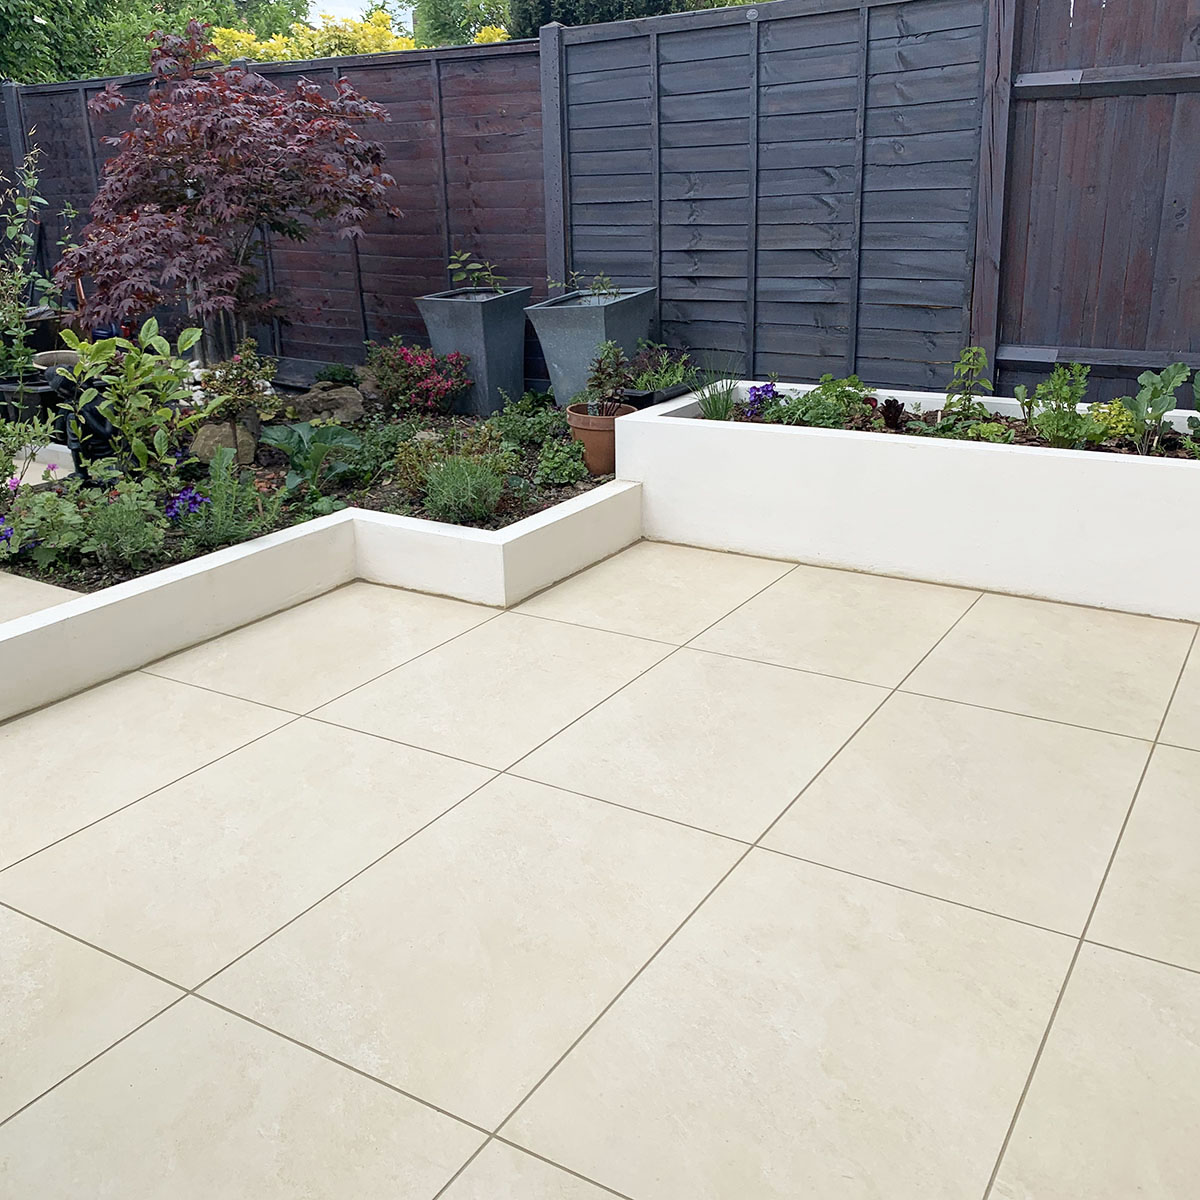 Porcelain Vs Natural Stone Patio Paving | Which Is Best? | Nustone